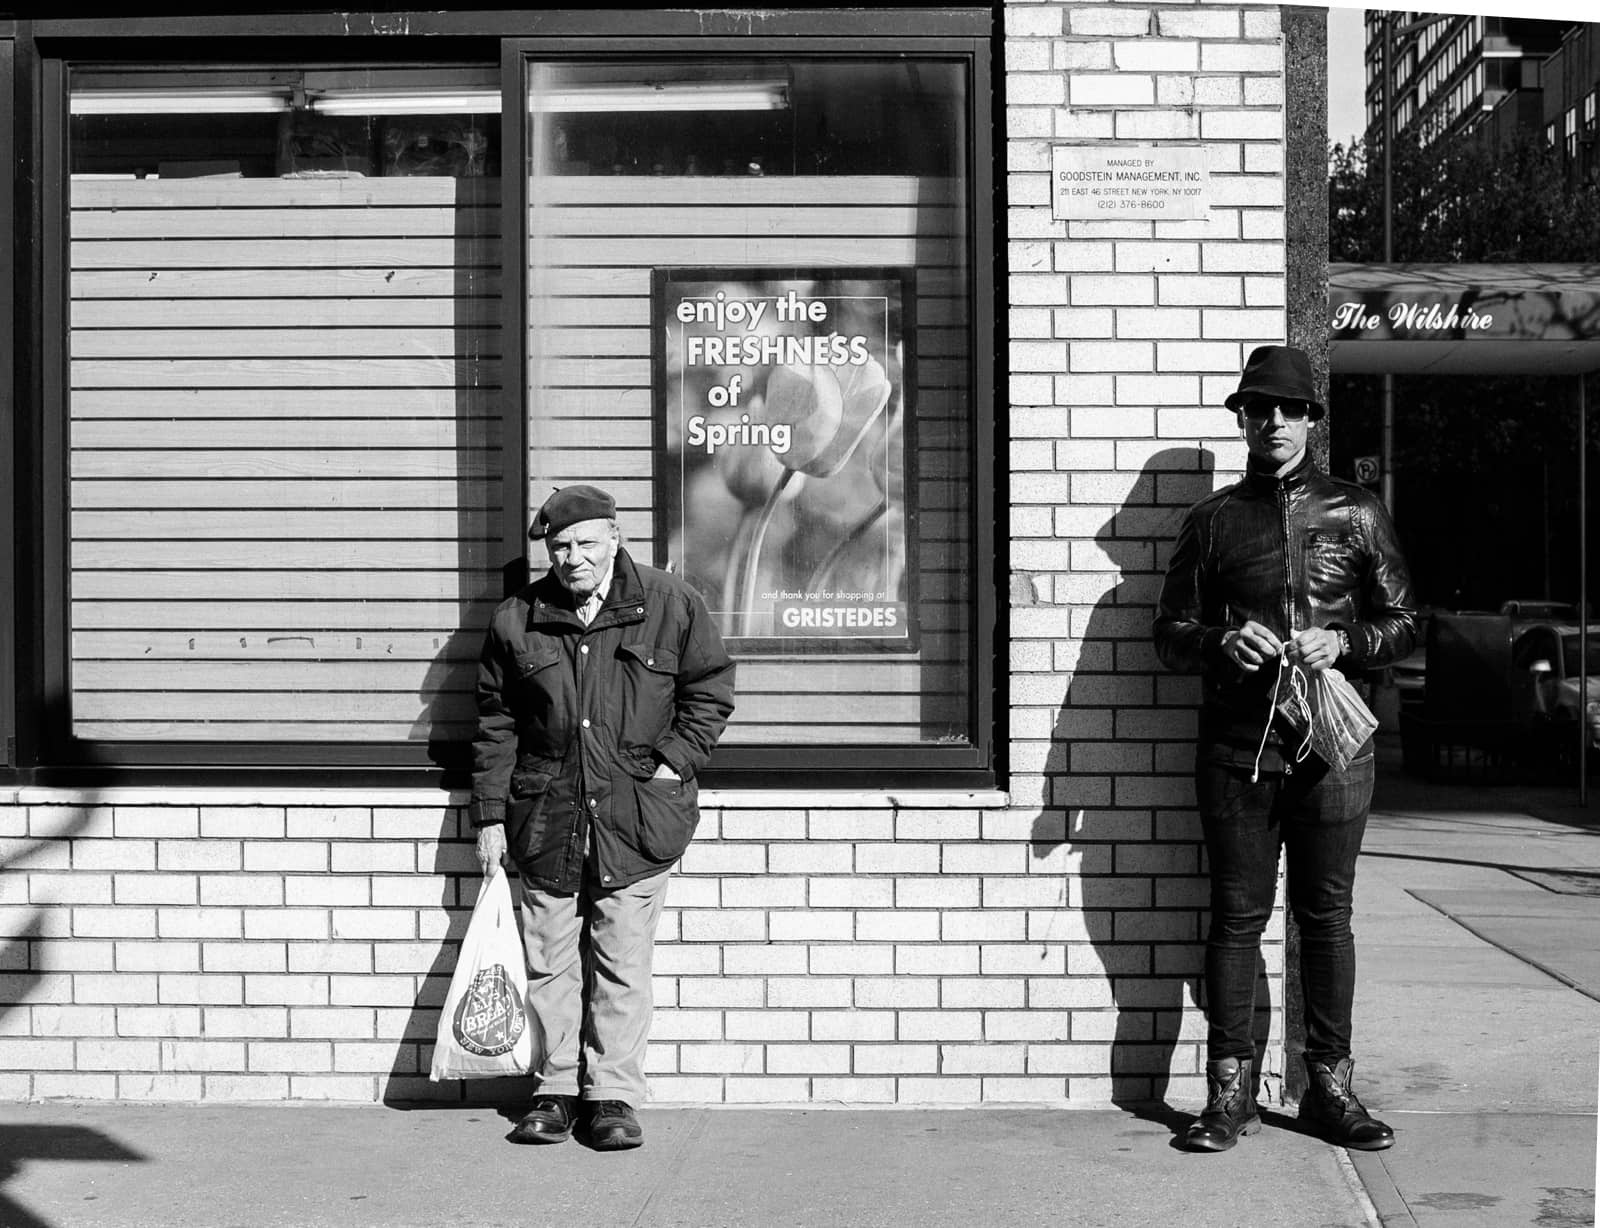 An older man and a young main waiting for the bus